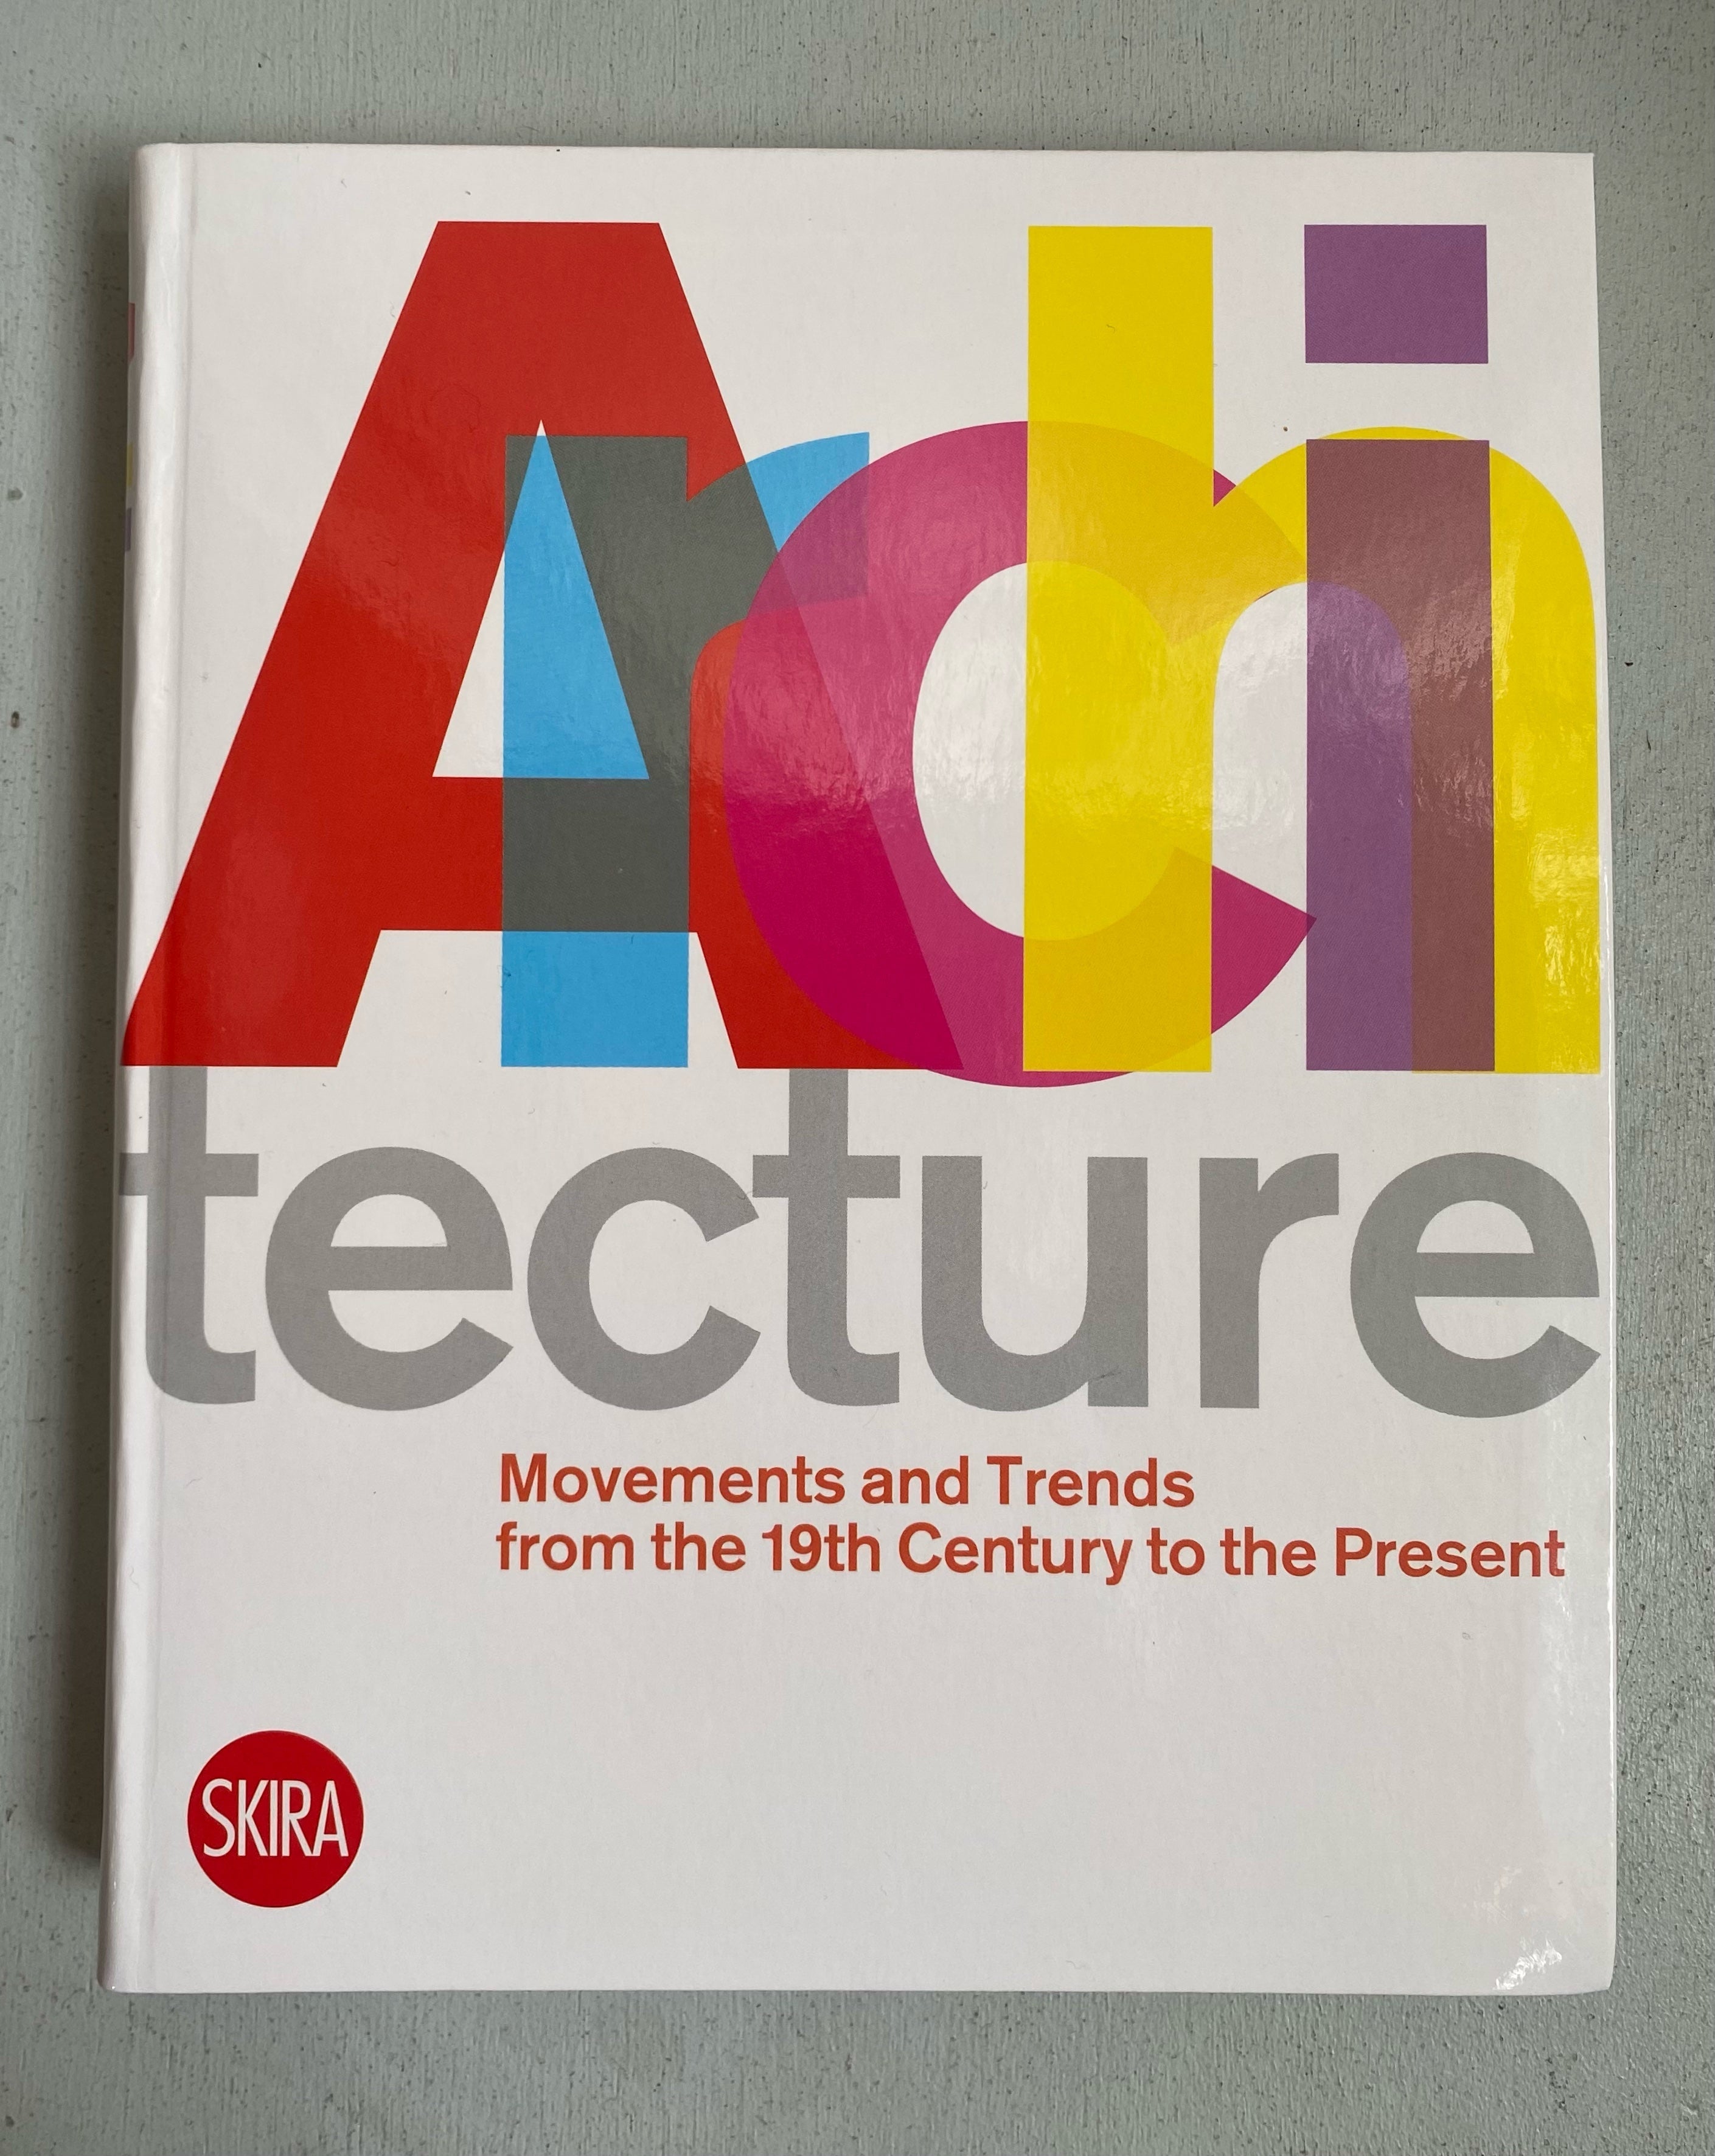 Architecture: Movements and Trends from the 19th Century to the Present